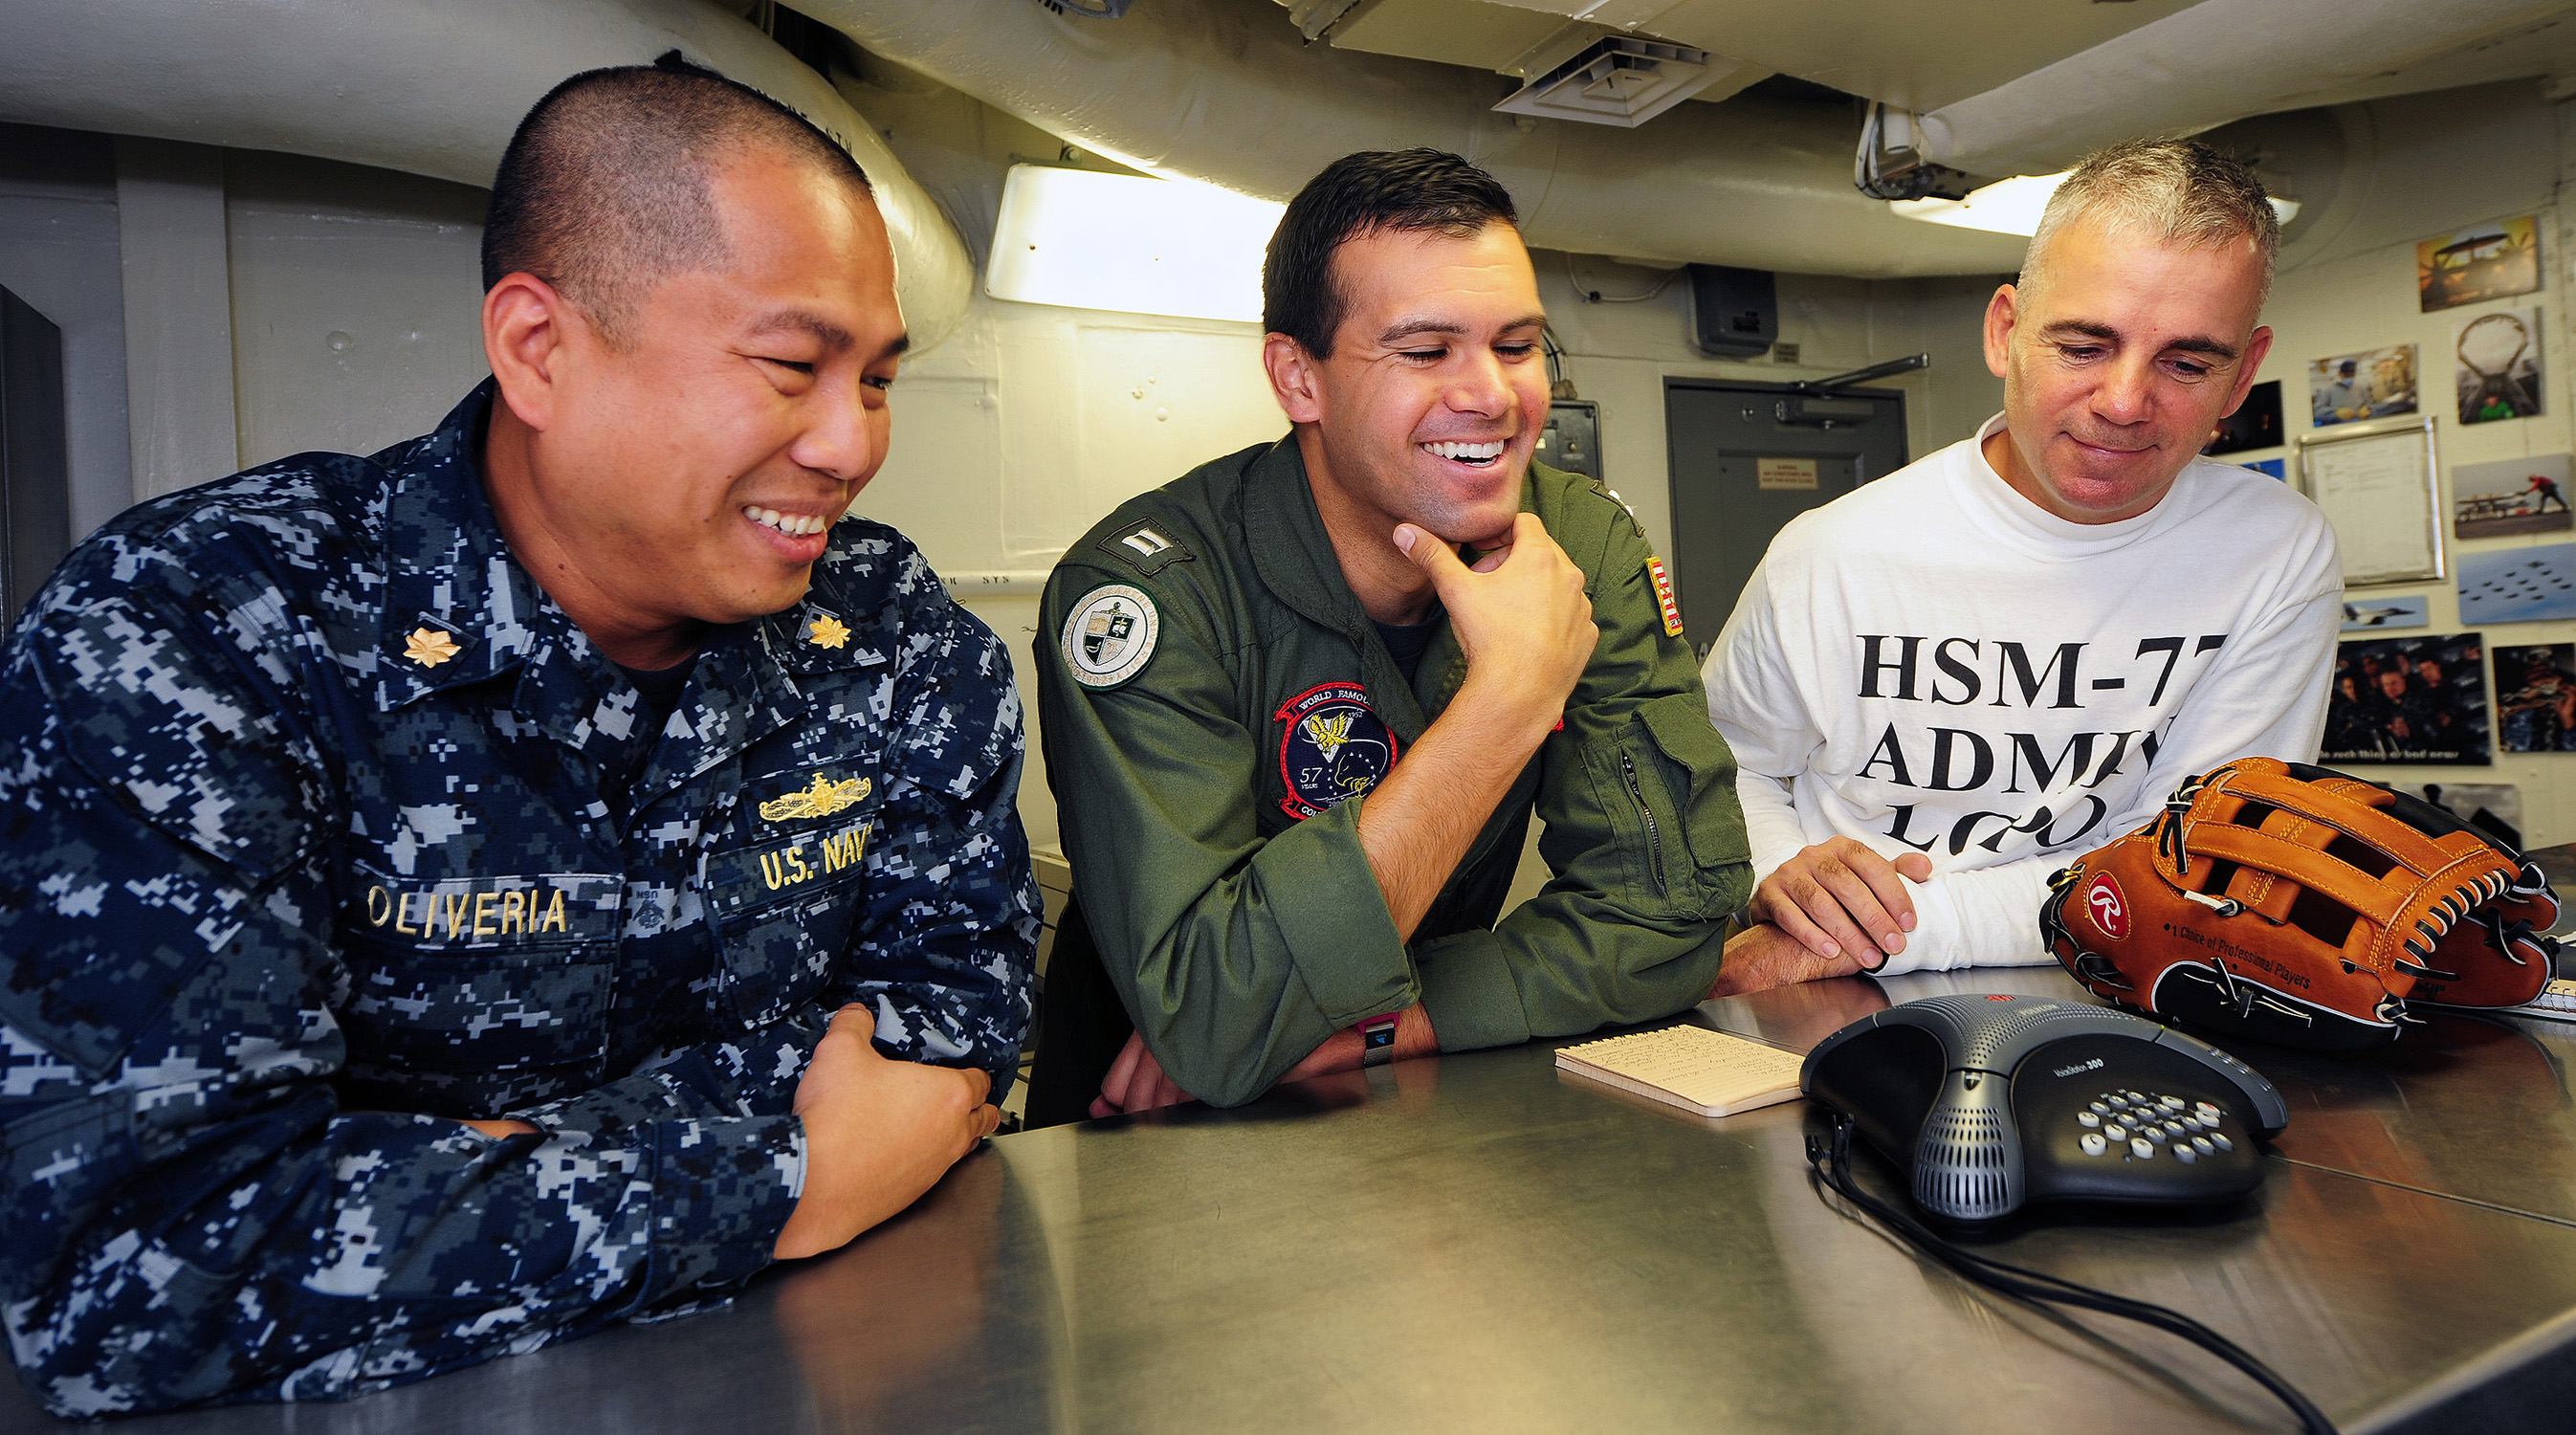 US Navy 111220-N-KQ416-025 Lt. Cmdr. Tristan Oliveria, Lt. Michael Chalfant and Chief Yeoman Ken Ingle ask San Diego Padres catcher Nick Hundley qu